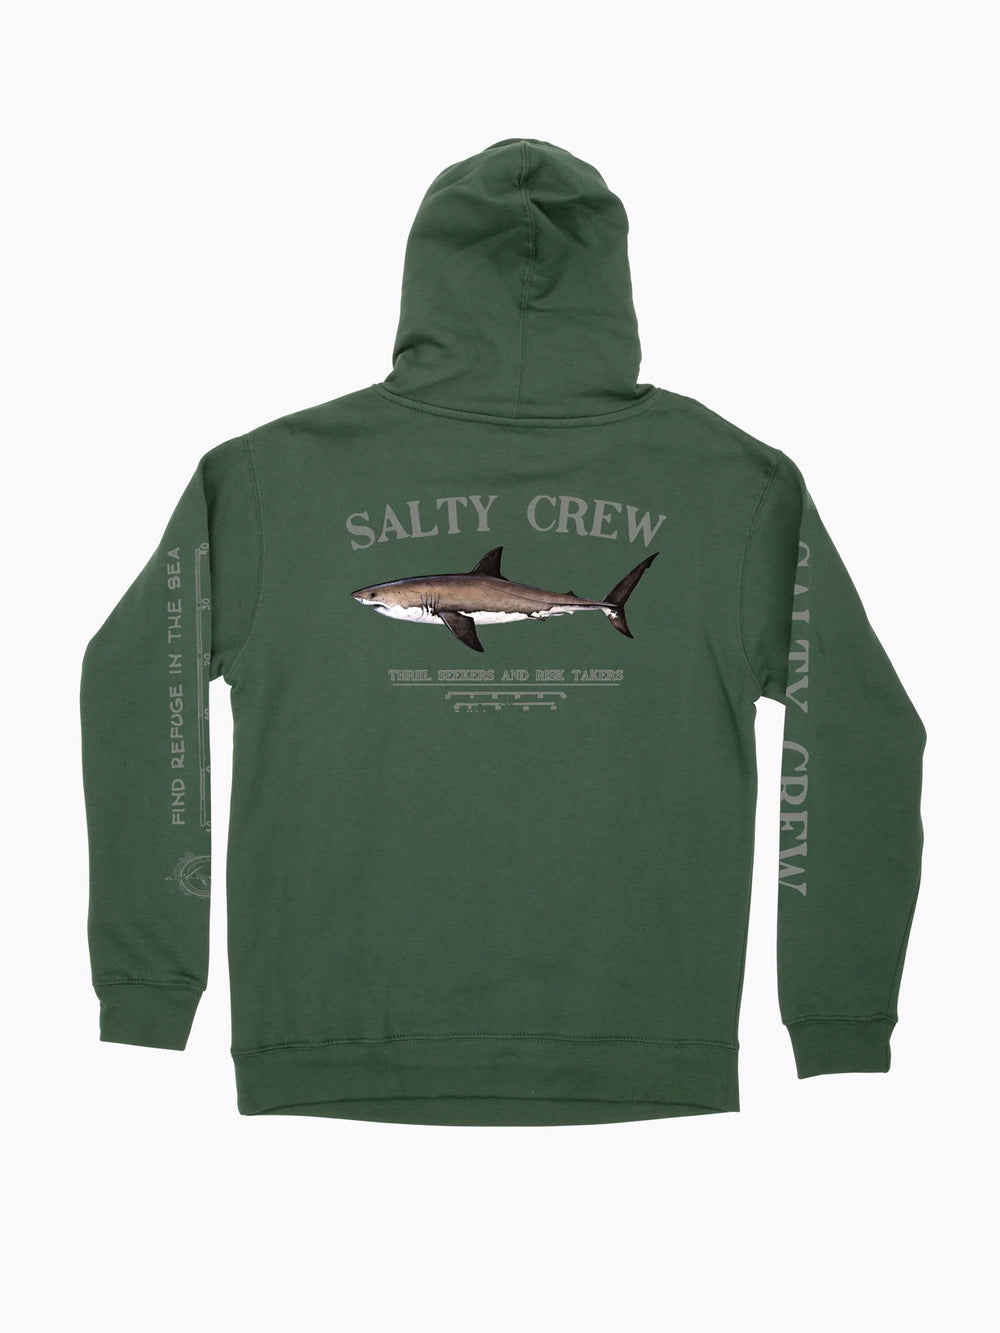 KIDS SALTY CREW YOUTH BOYS BRUCE HOODIE - CLEARANCE